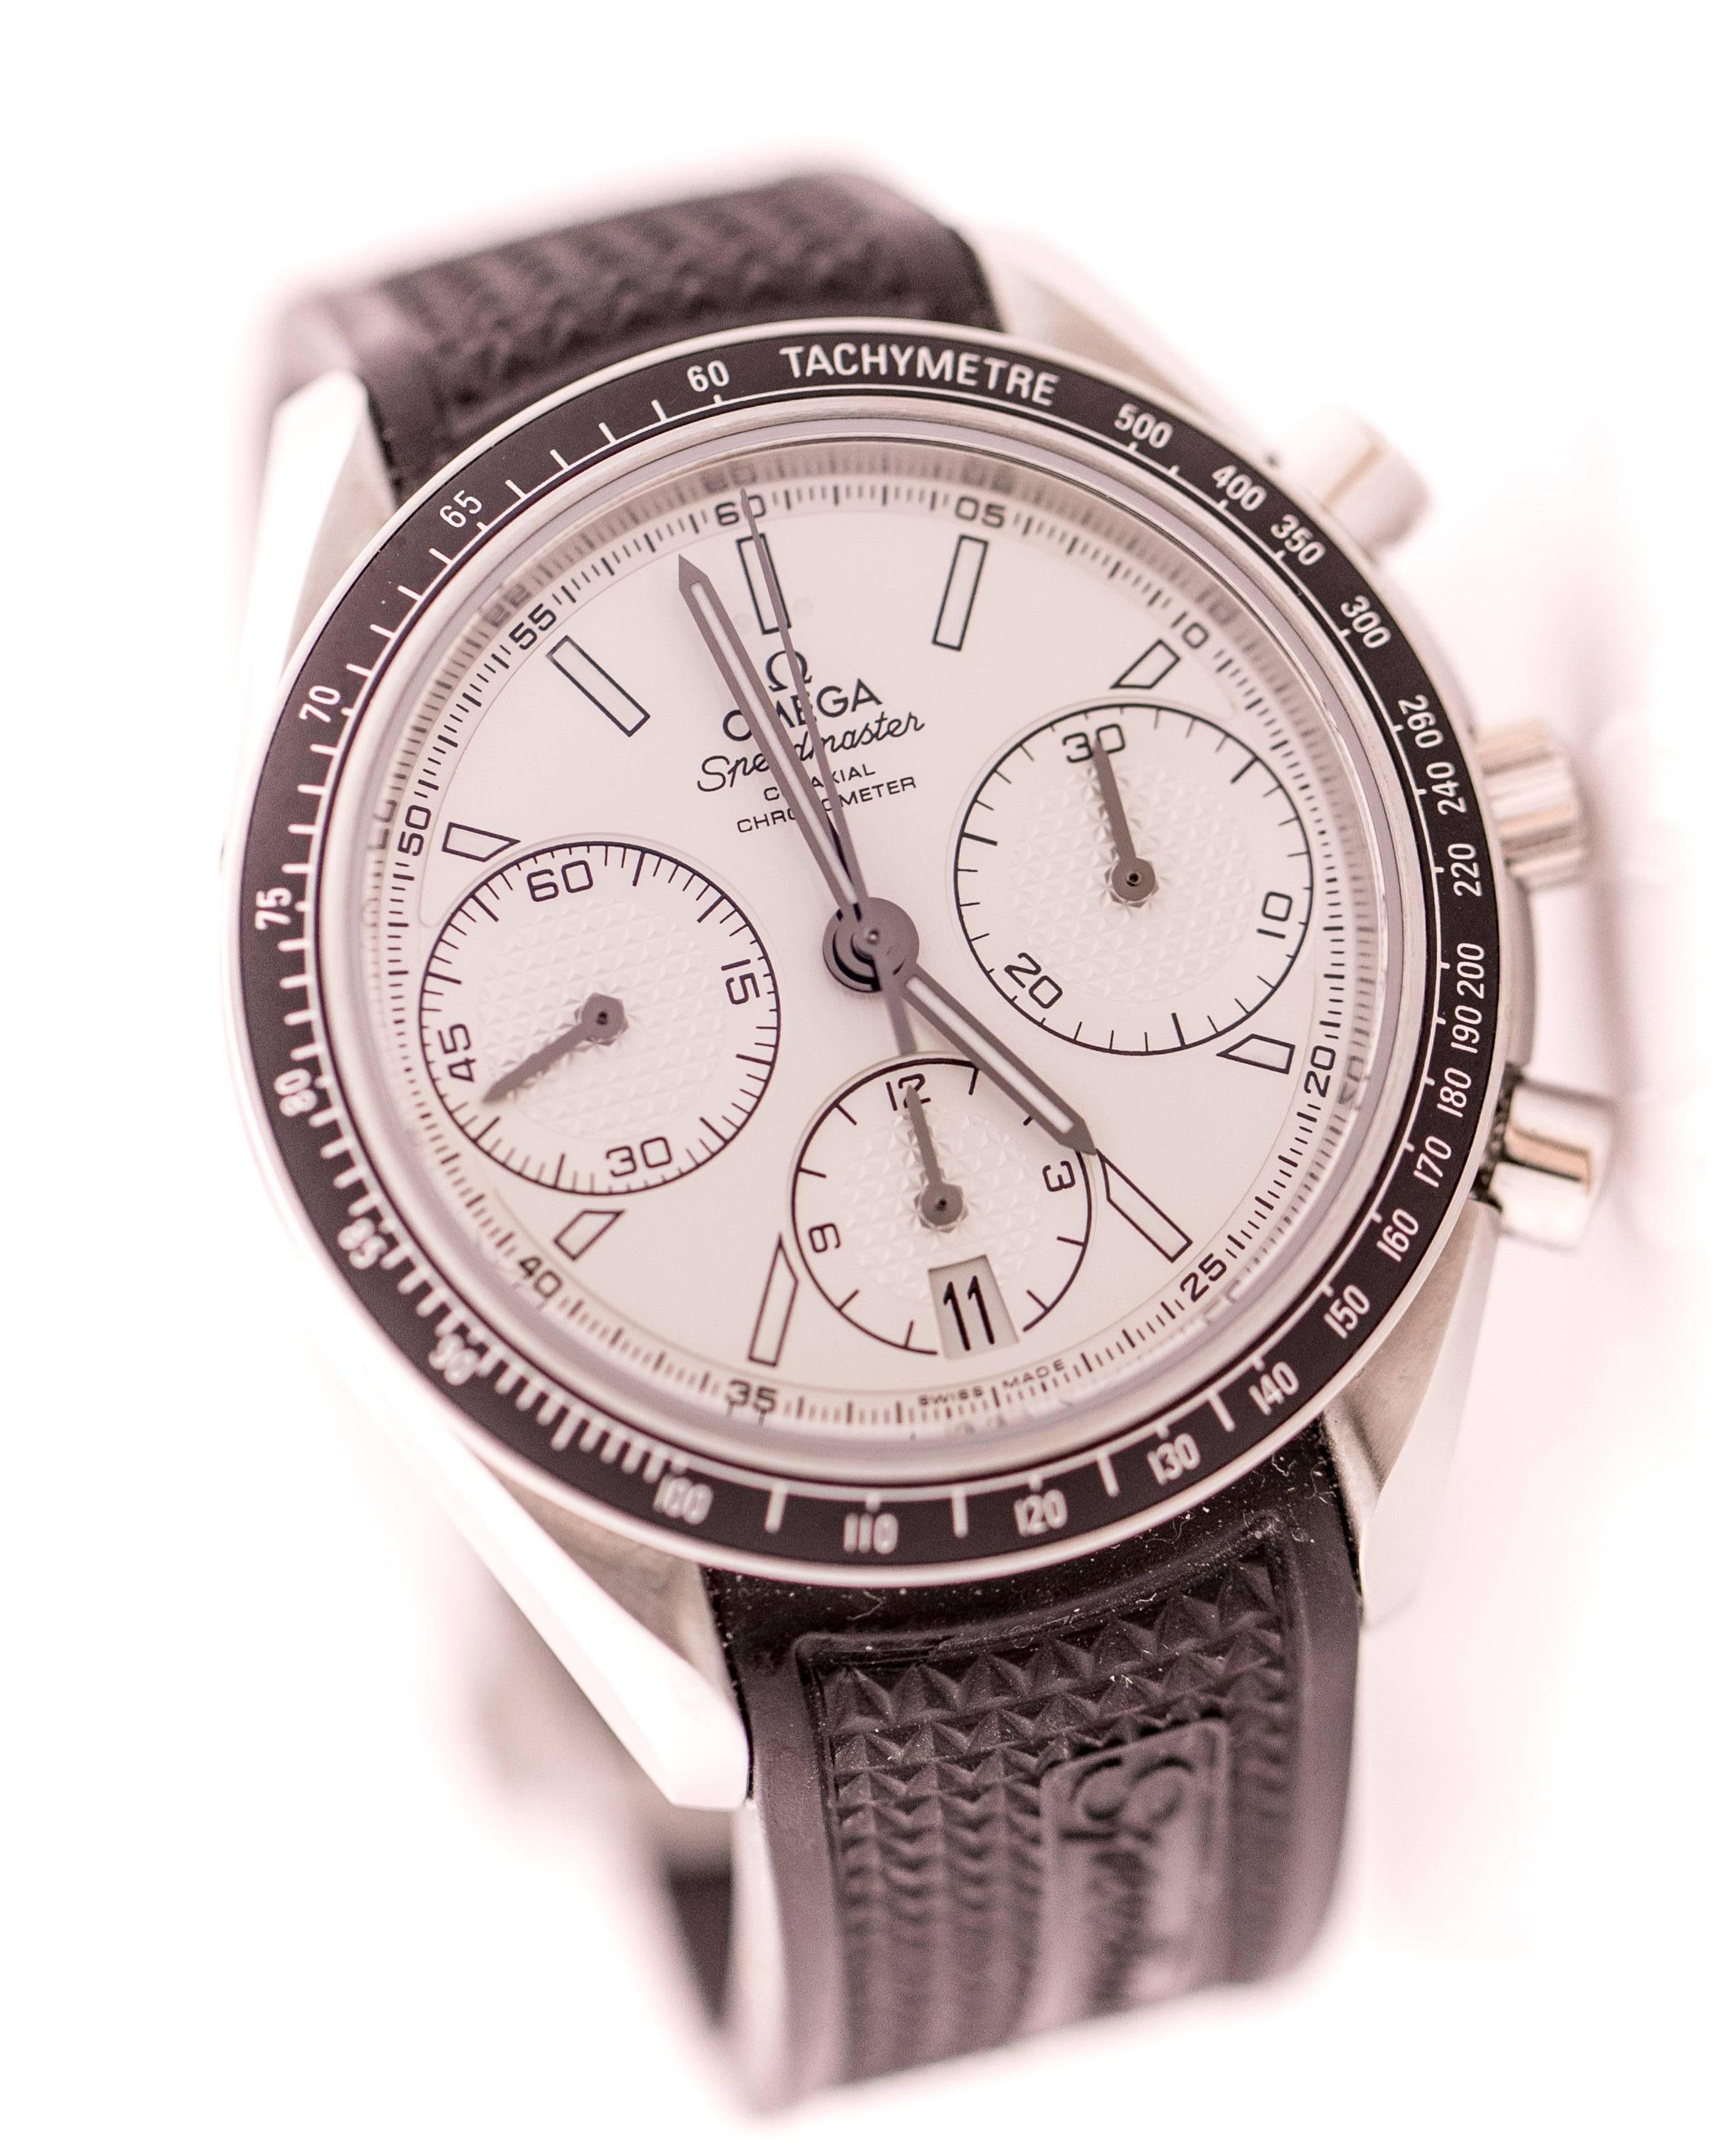 The Iconic Omega Speedmaster has been part of all six lunar missions!
This Omega Speedmaster Racing watch is a modernized version of the Iconic Classic. 

Features:
-Opaline silver dial
-Scratch-resistant sapphire crystal
-Date window at the 6:00